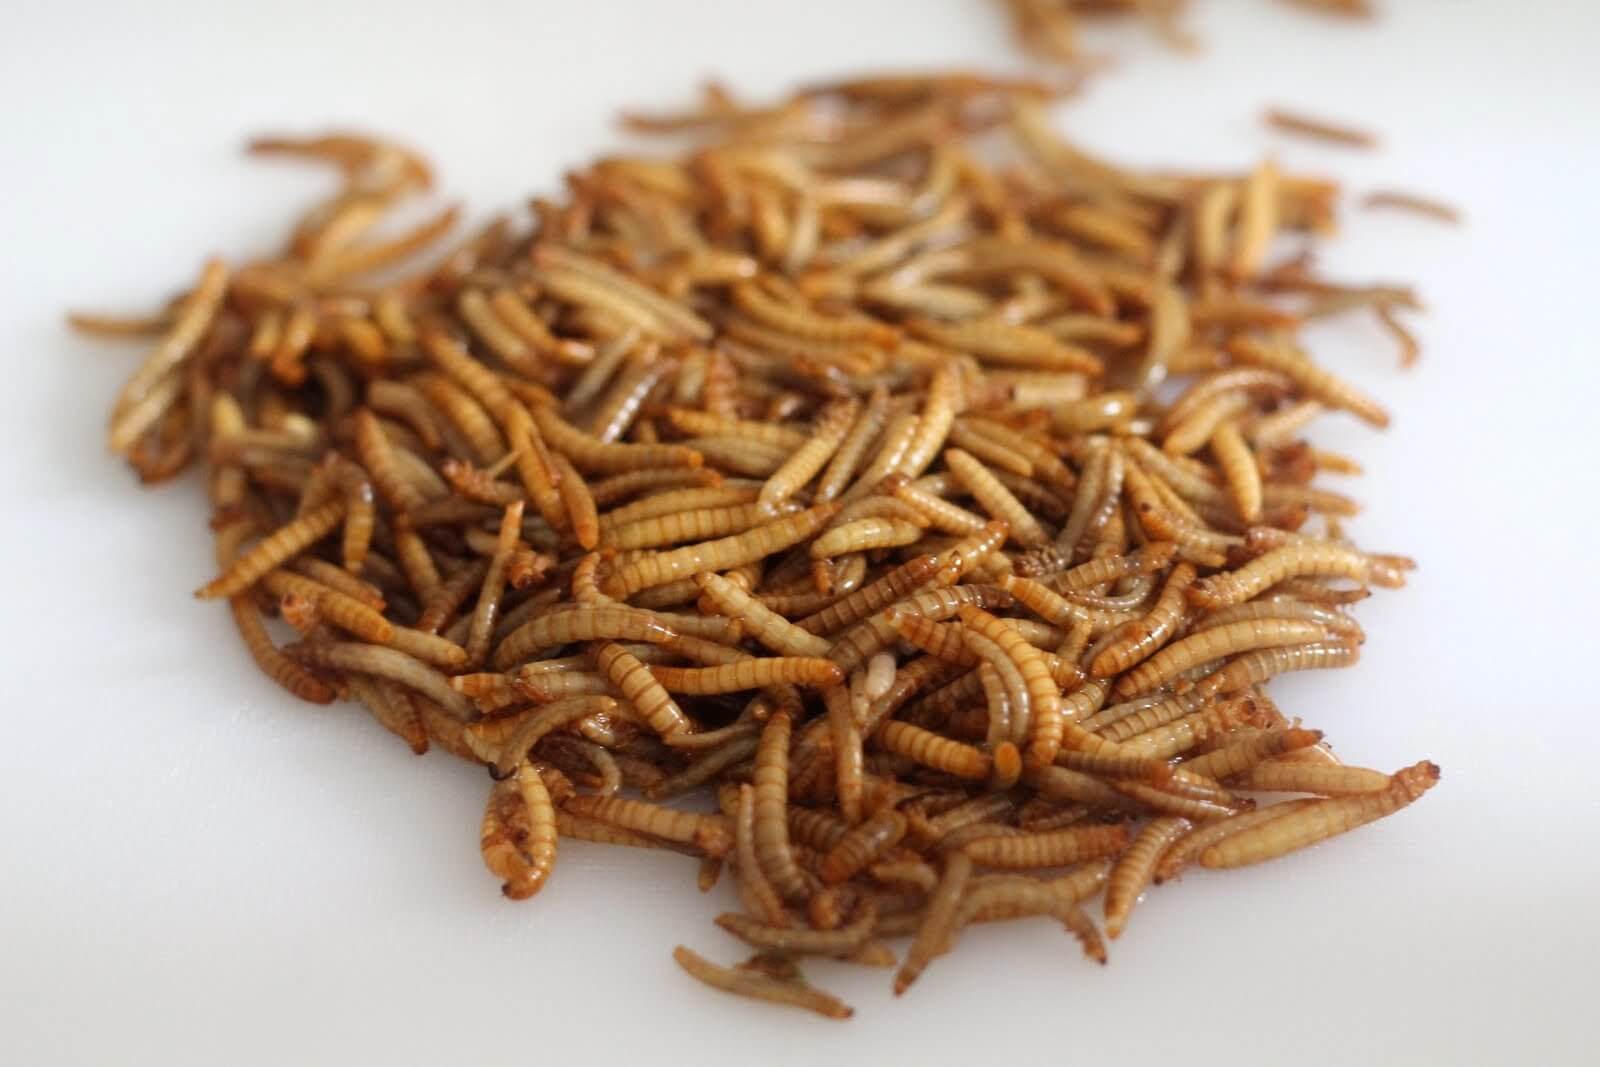 Can Eating Insects Save the World?